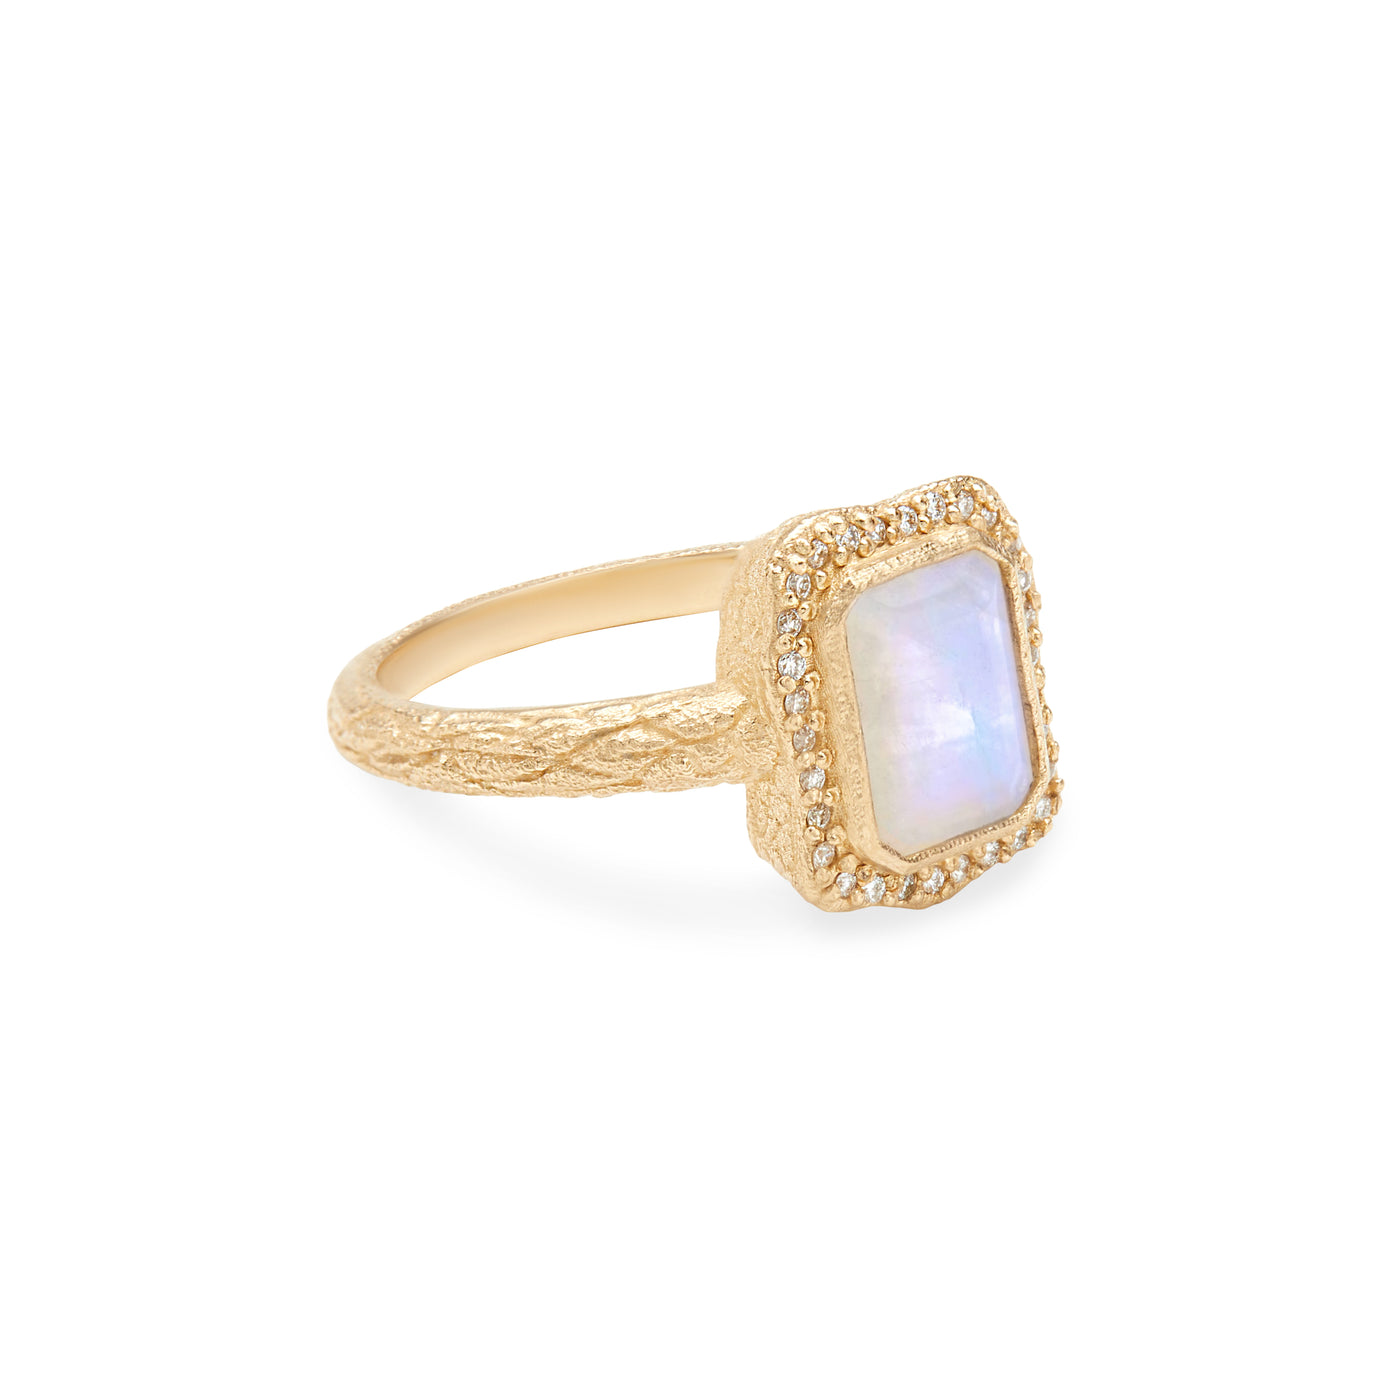 14 Karat Yellow Gold Ring with Rectangle Shaped Moonstone with Halo of White Diamonds Against White Background turned for detail